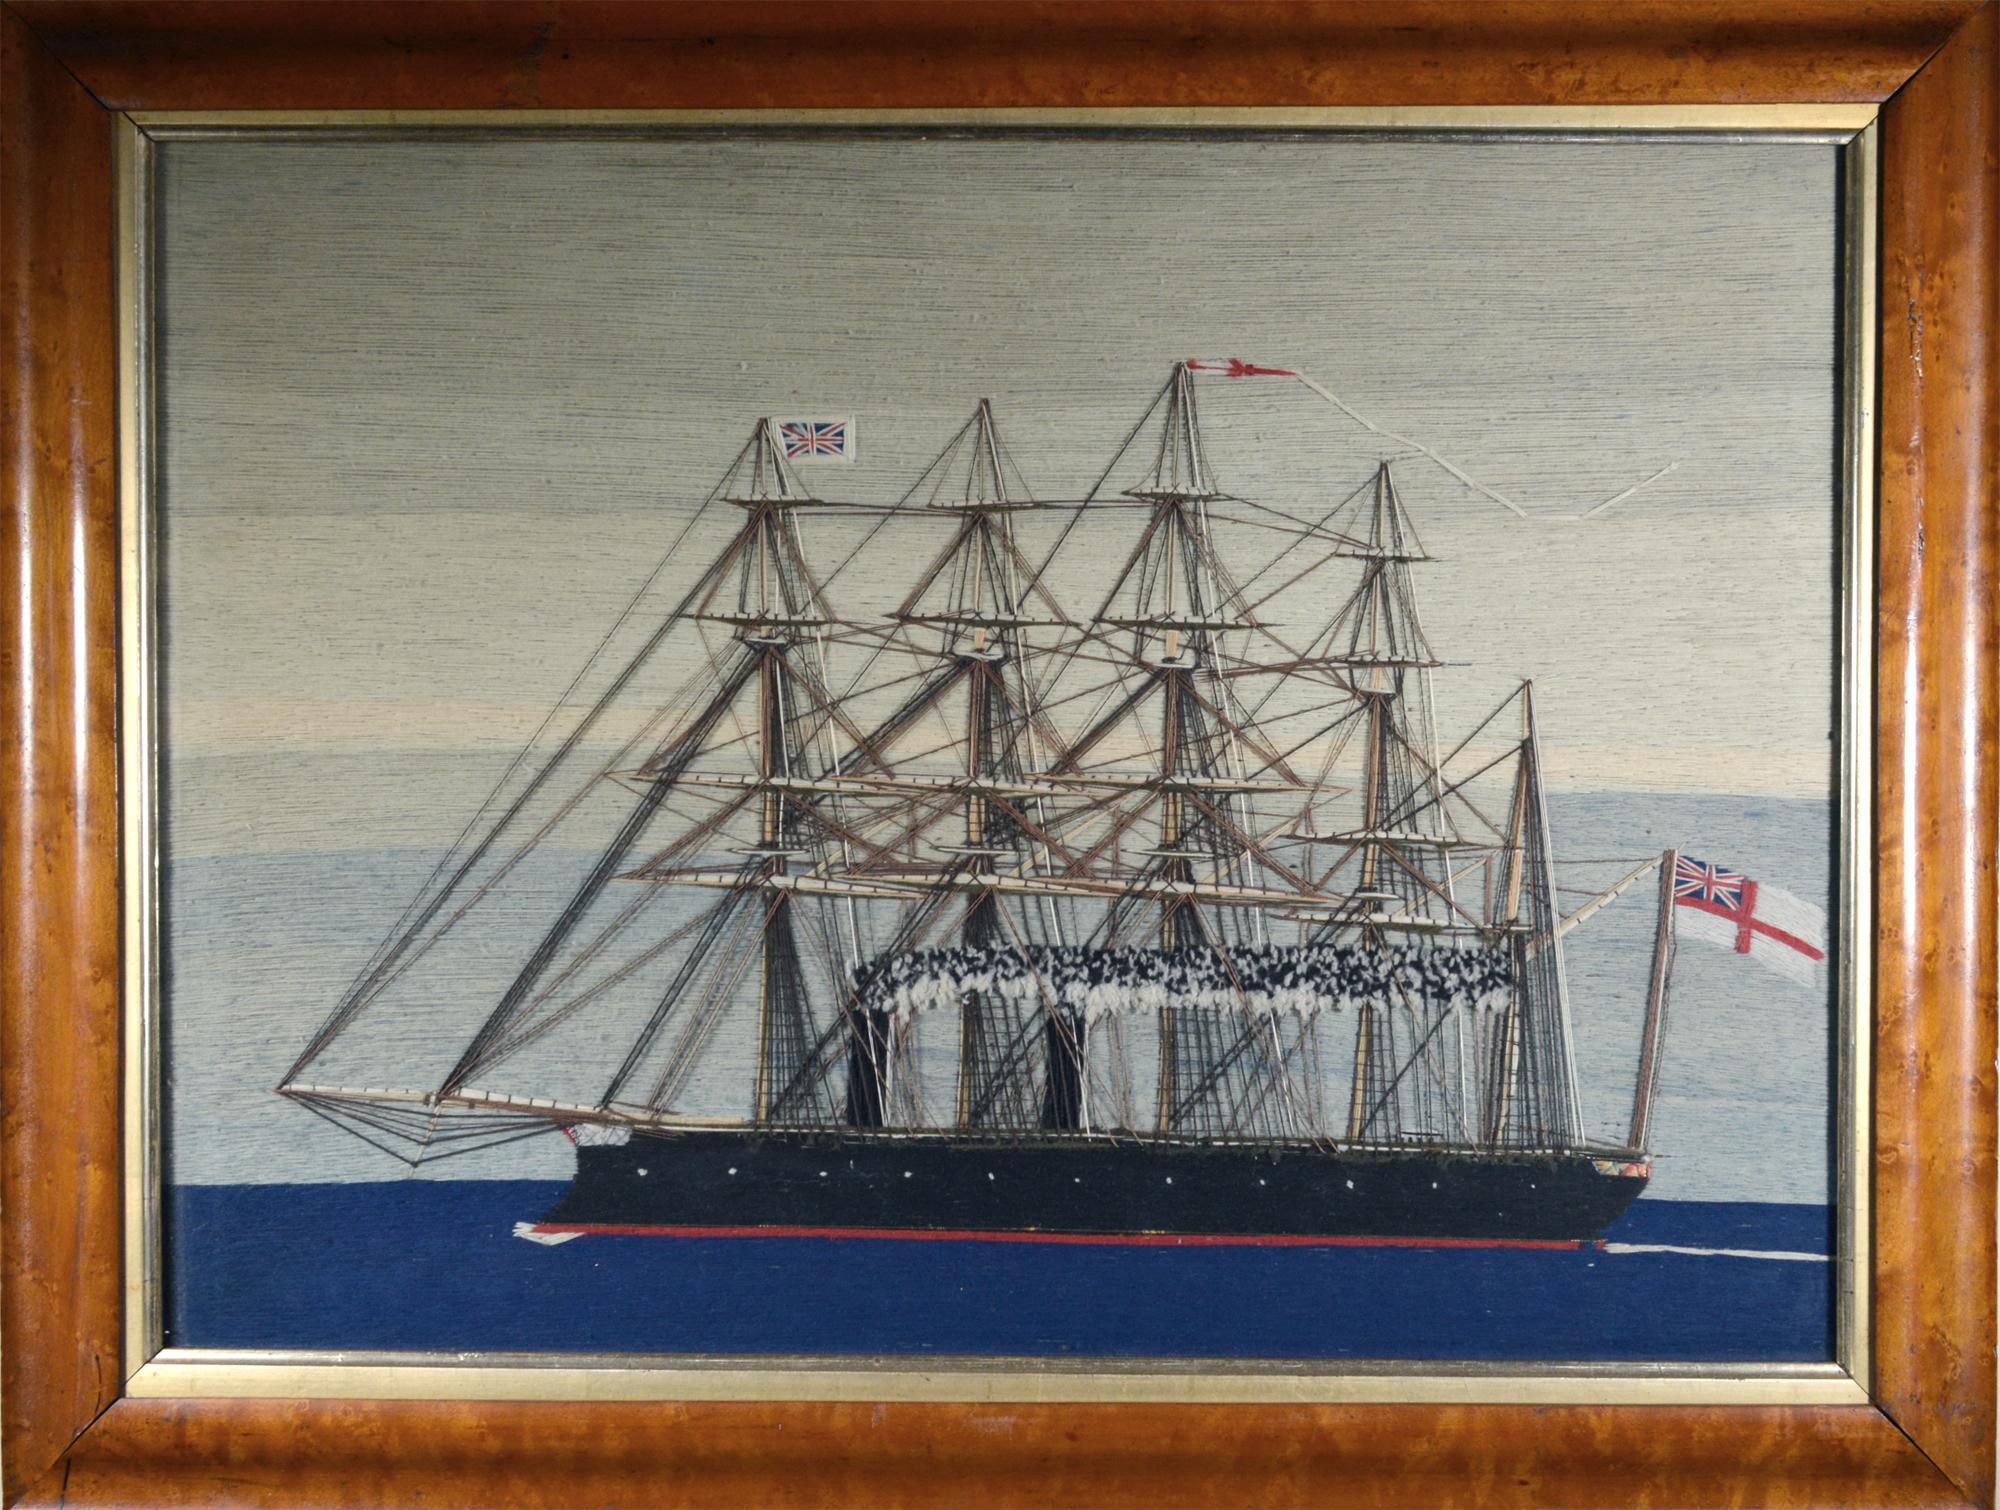 English Sailor's Woolwork of Royal Navy Five-Masted Ship under Steam, Minotaur Class For Sale